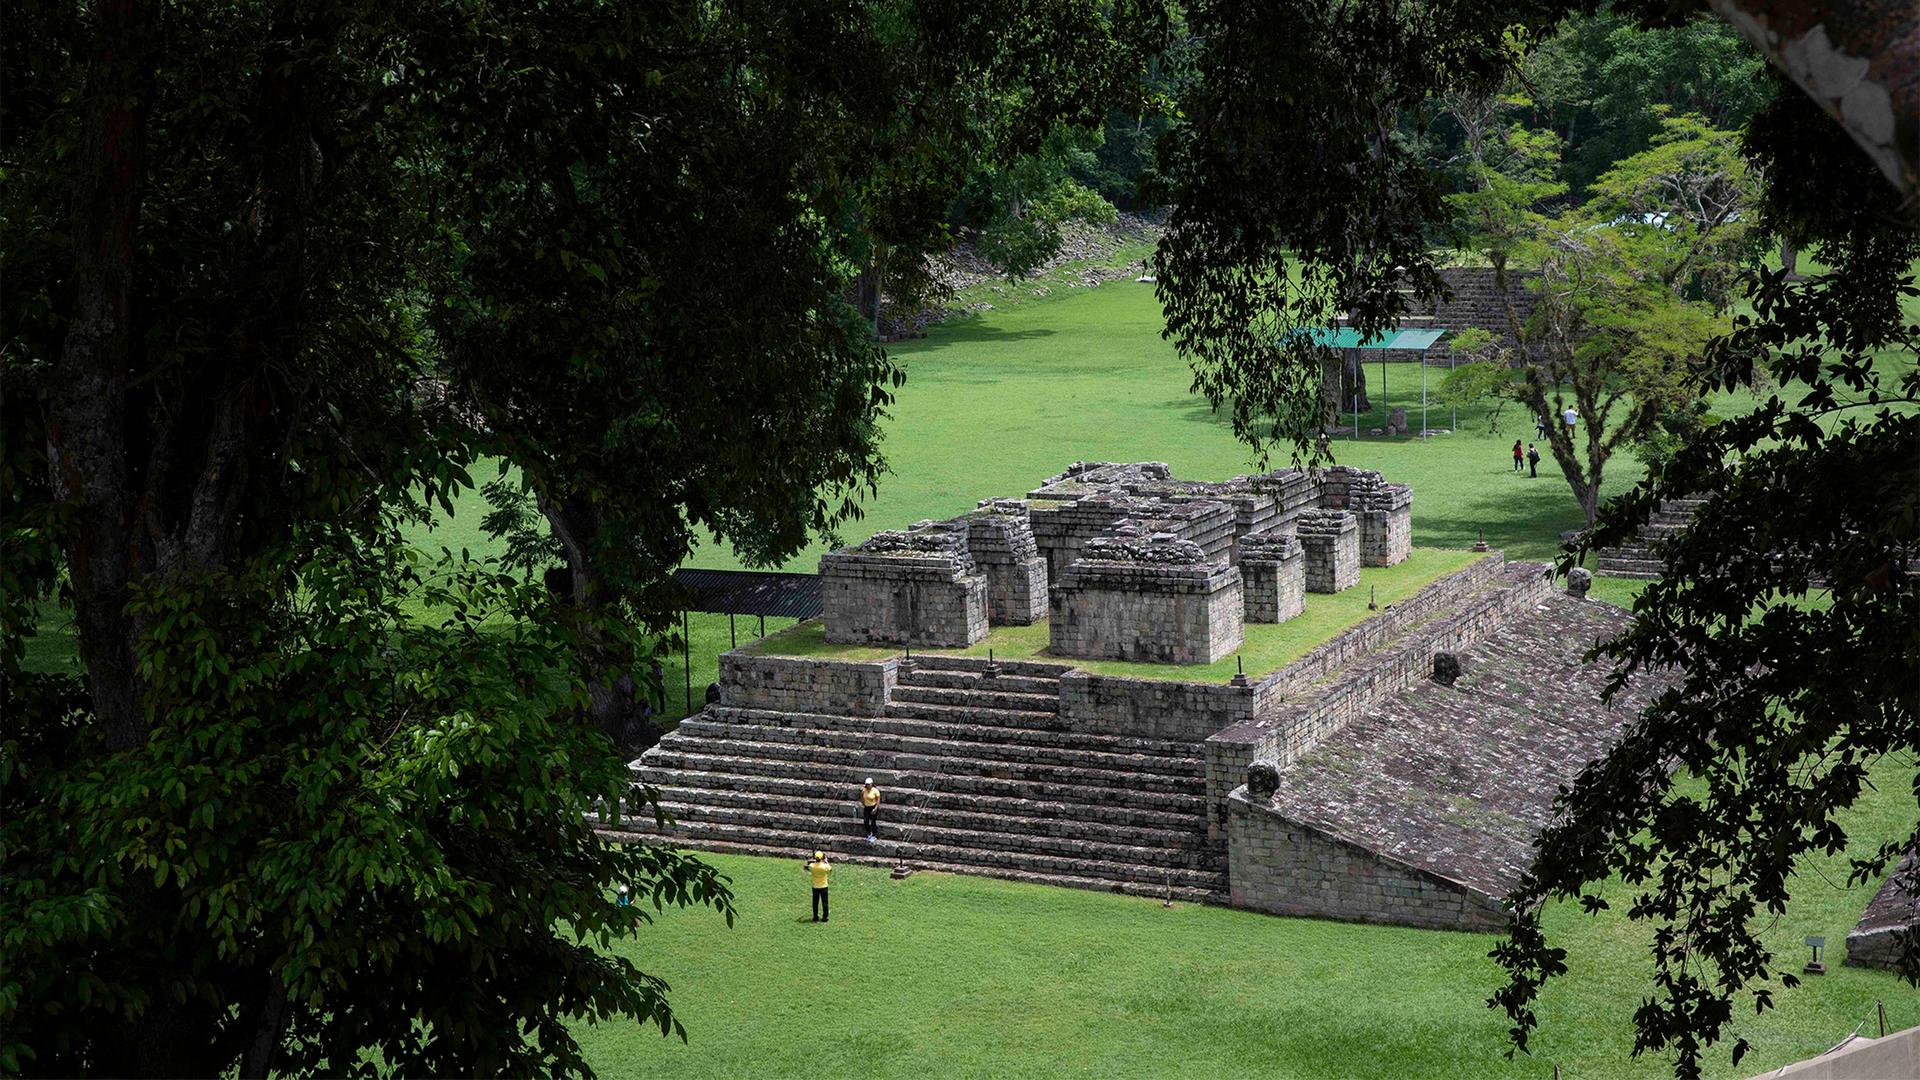 Mayan stone ruins in a field of foliage